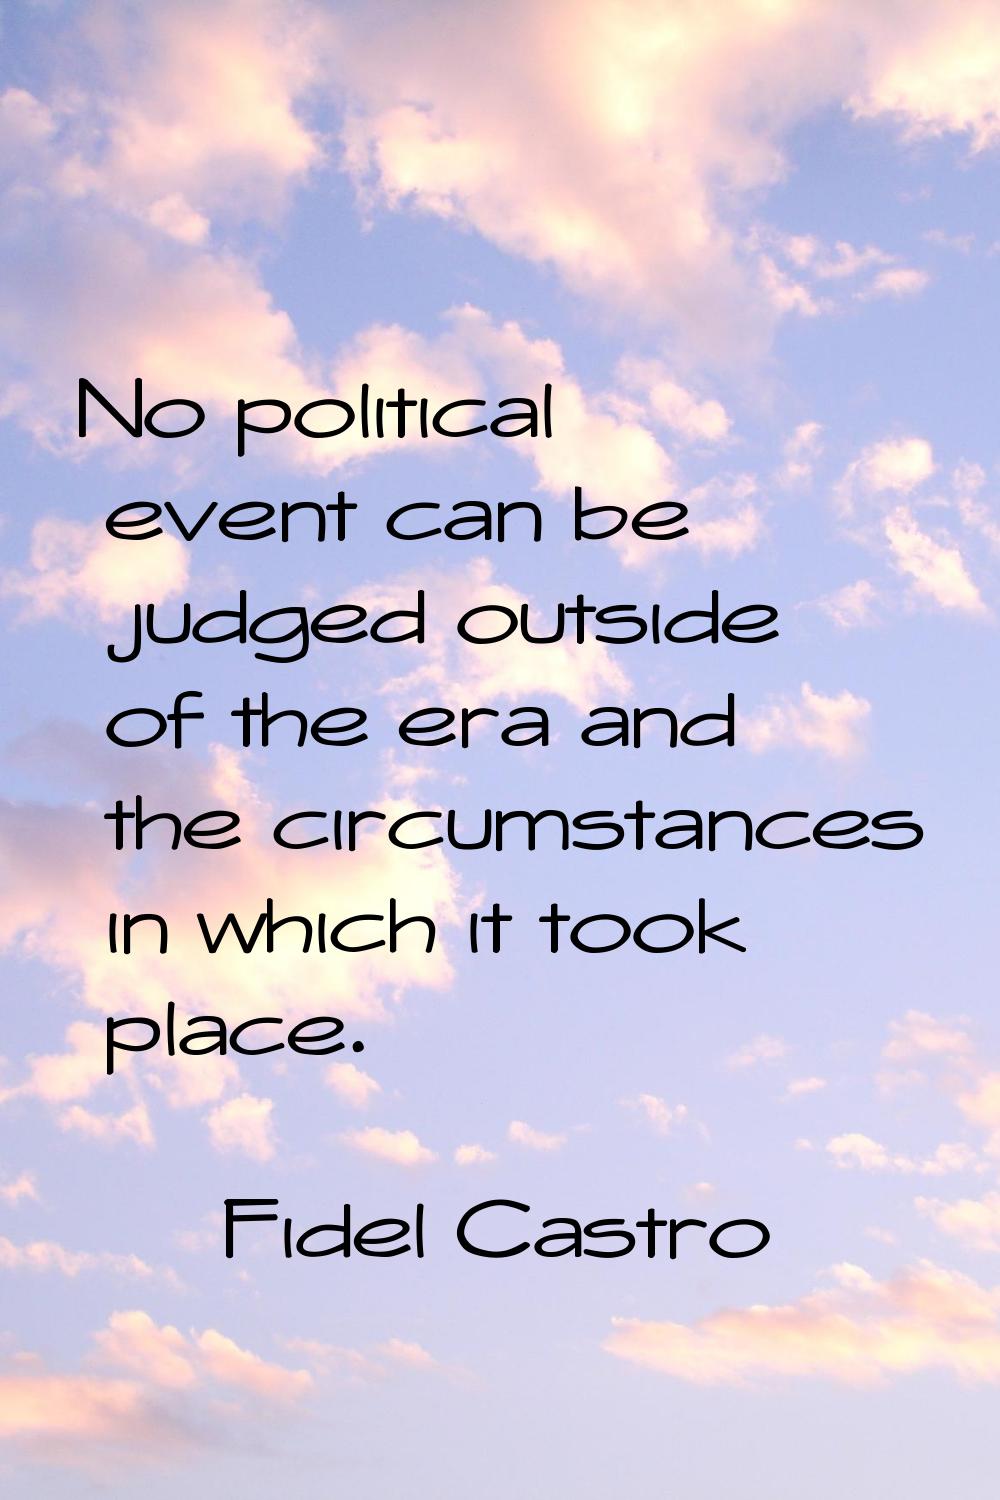 No political event can be judged outside of the era and the circumstances in which it took place.